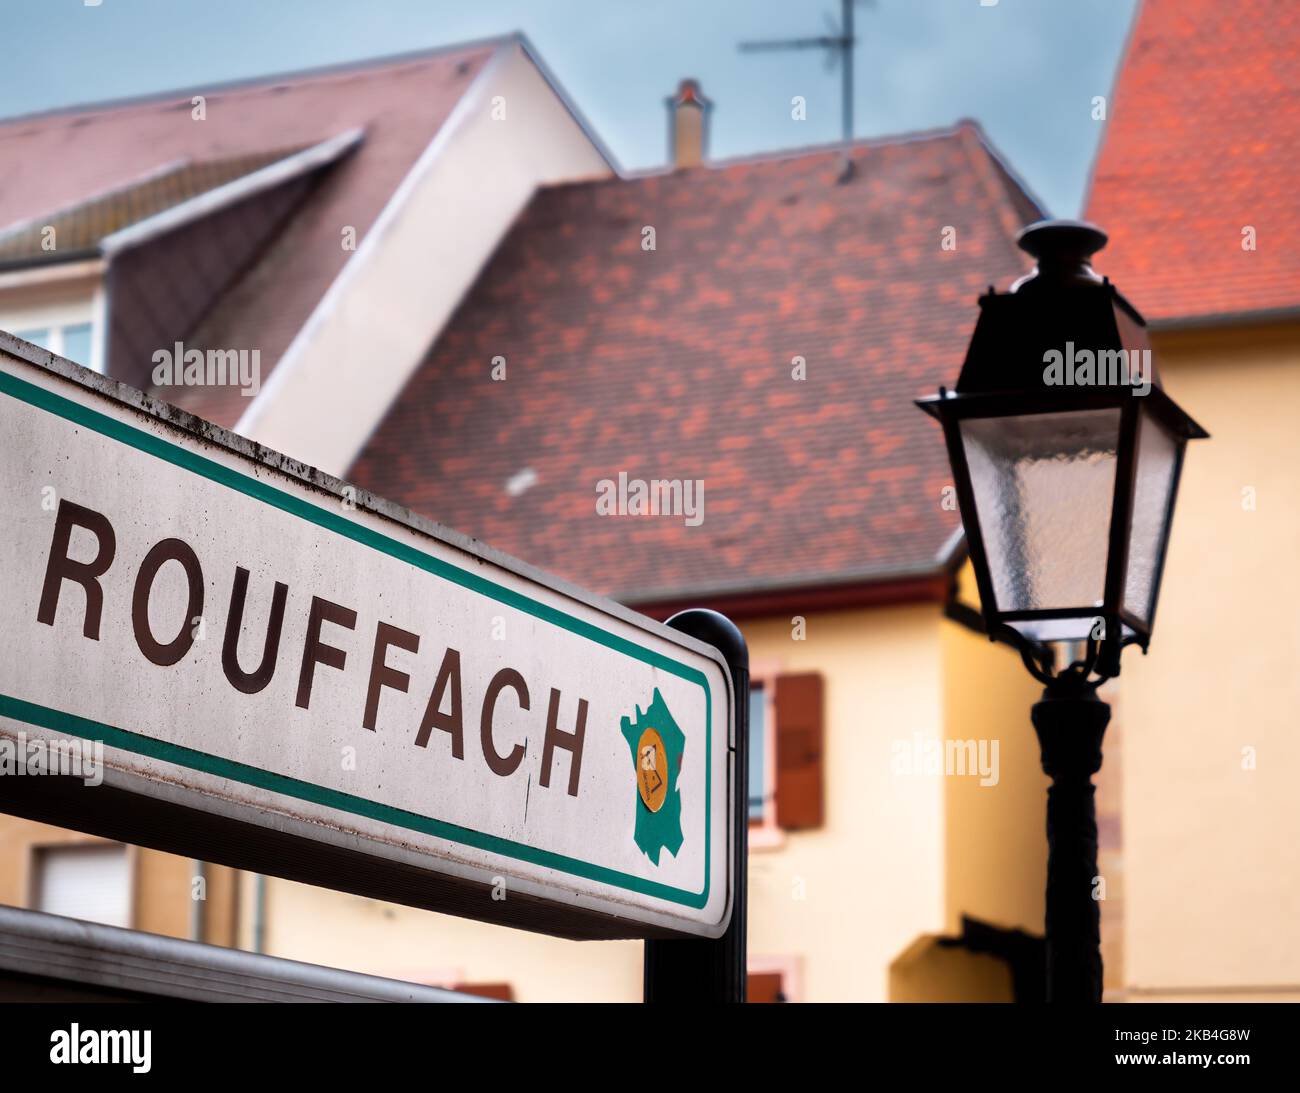 Rouffach, France - October 11, 2022: Rouffach is a medieval town along the wine route in southern Alsace, France. Stock Photo